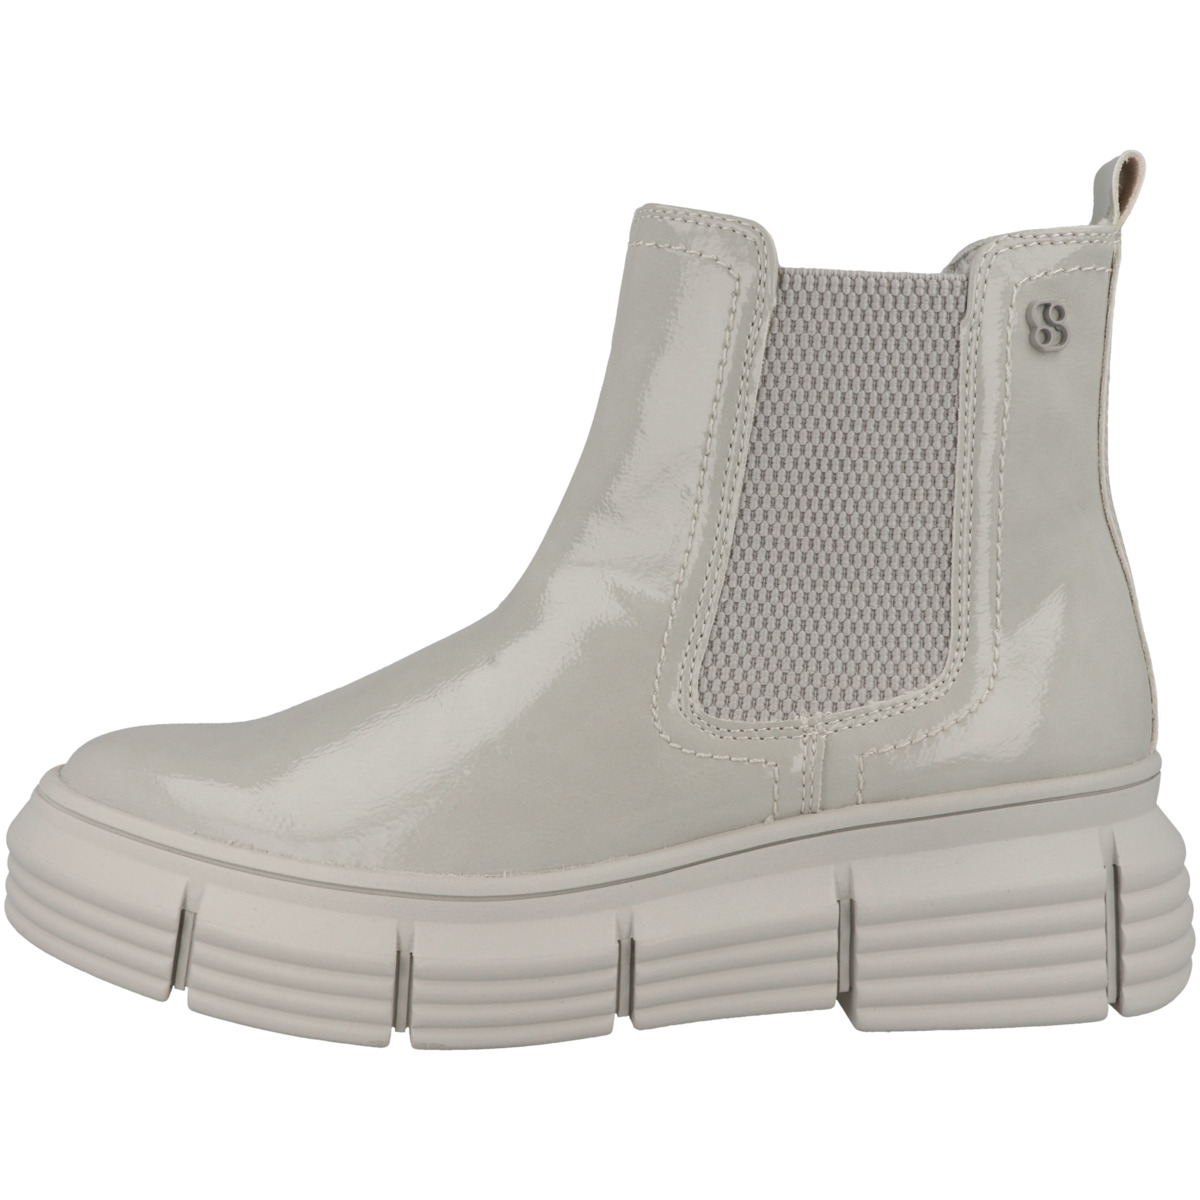 s.Oliver 5-25413-29 Chelsea Boots hellgrau